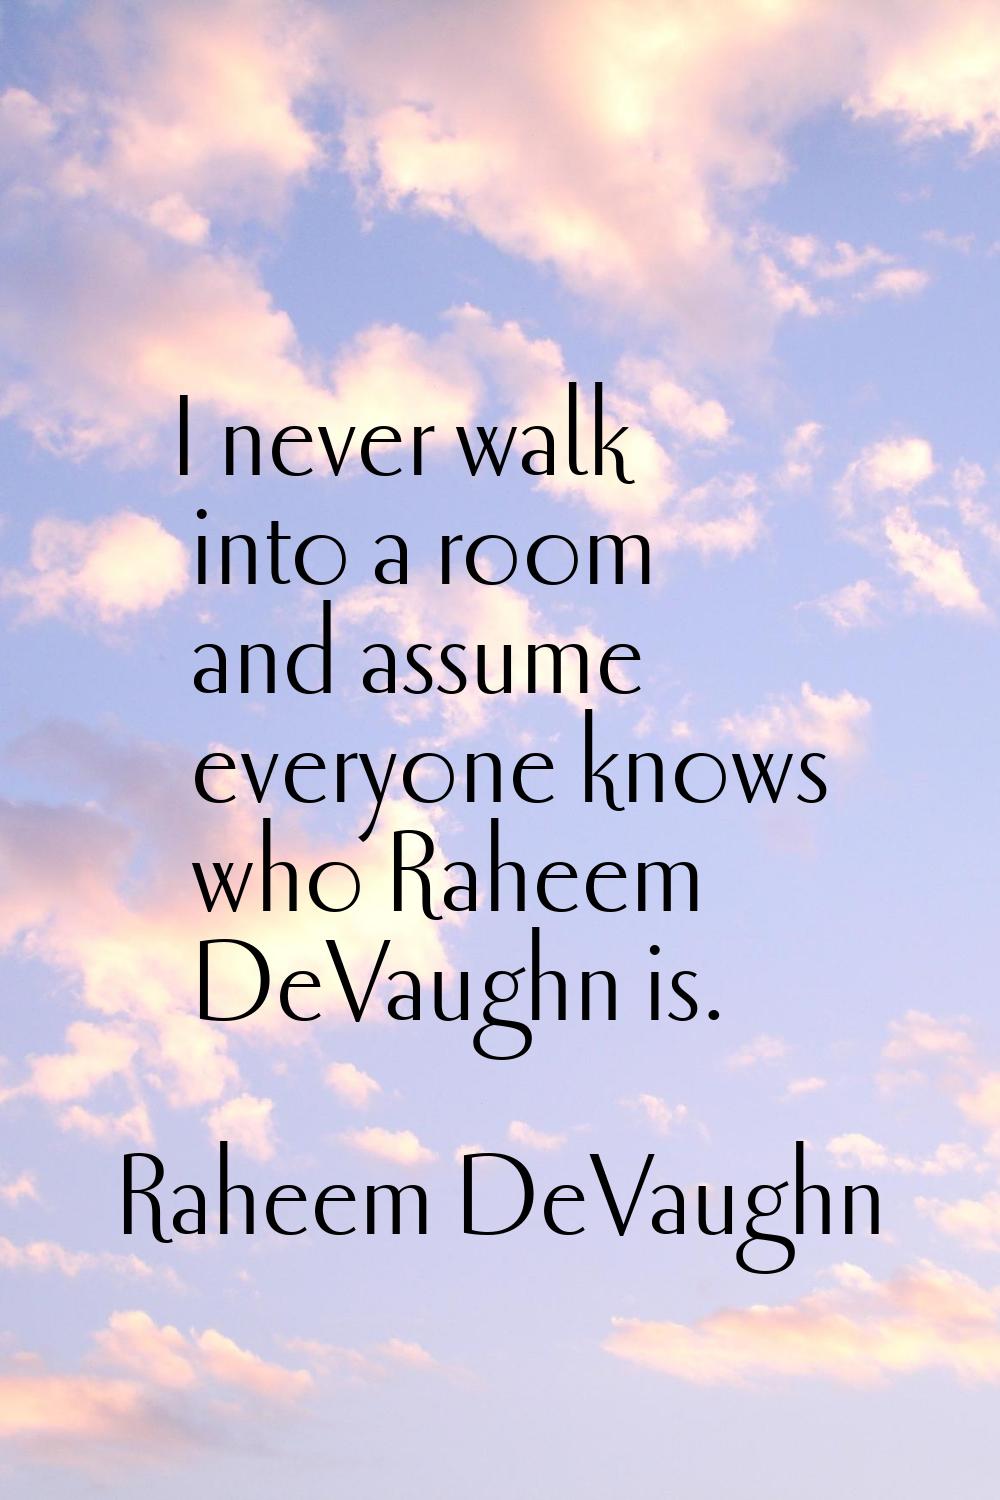 I never walk into a room and assume everyone knows who Raheem DeVaughn is.